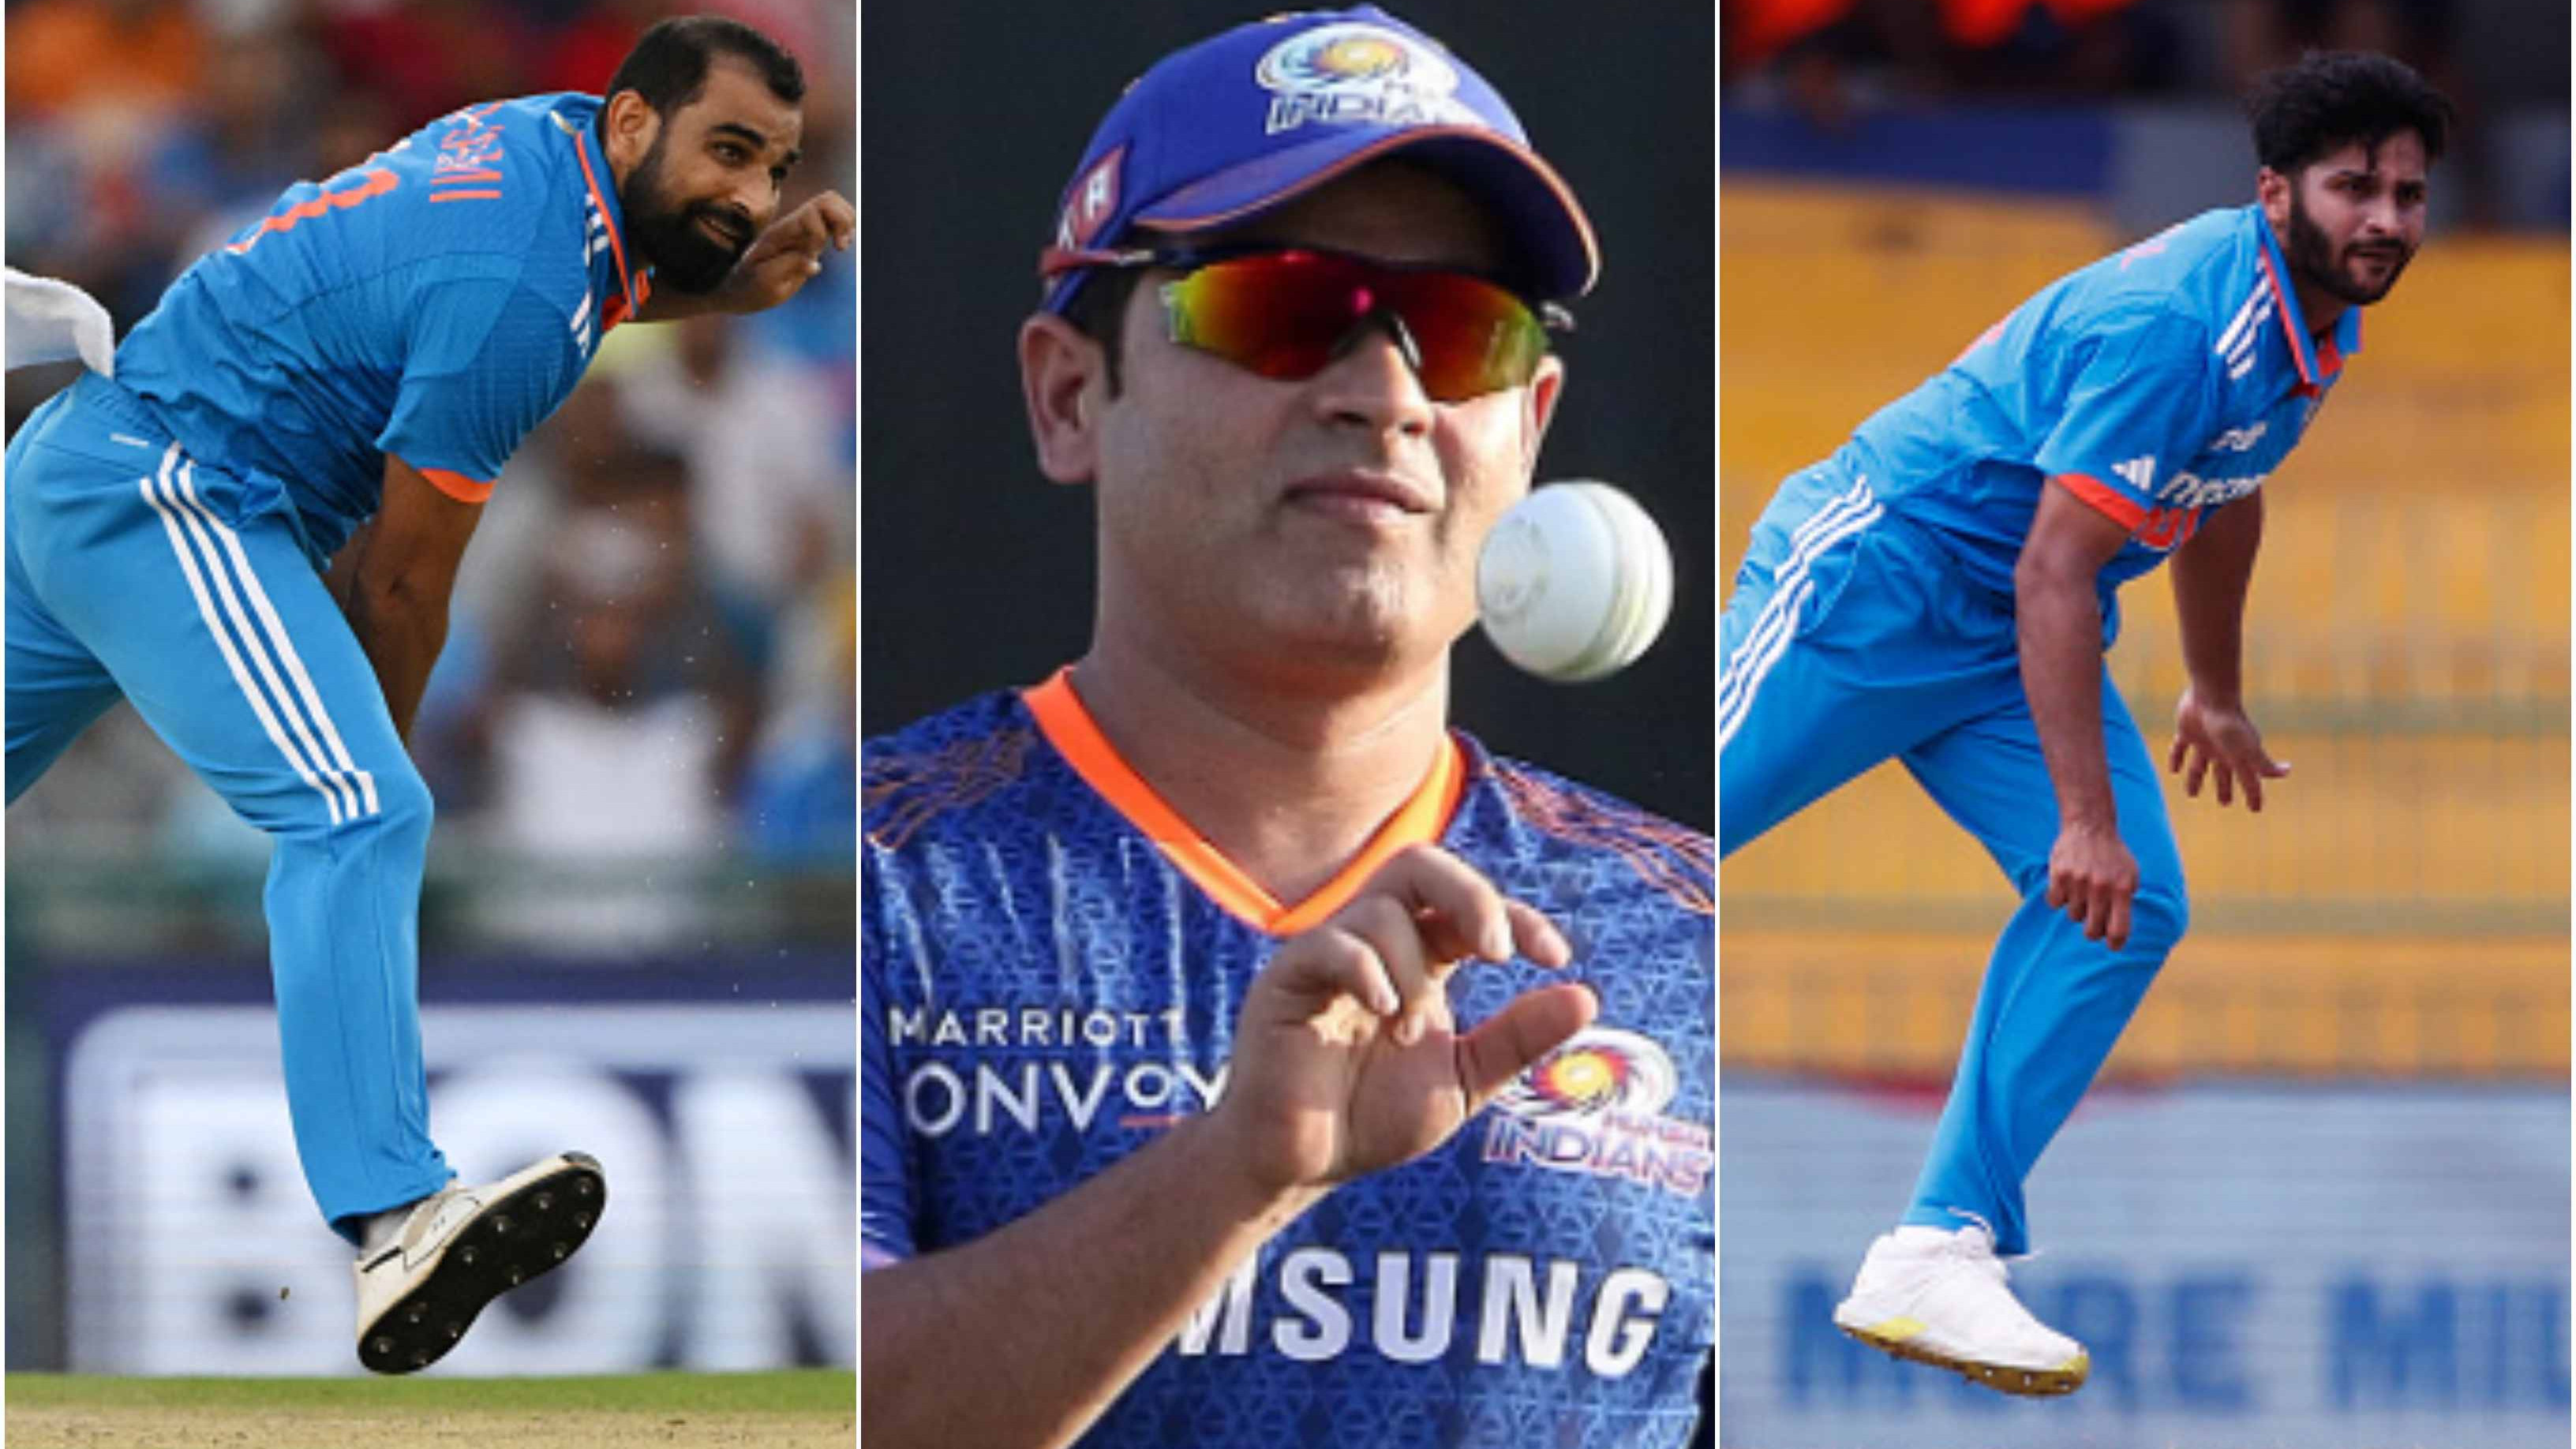 CWC 2023: “You need a proper bowler,” Chawla calls for Shami’s inclusion in India’s XI for World Cup games ahead of Shardul